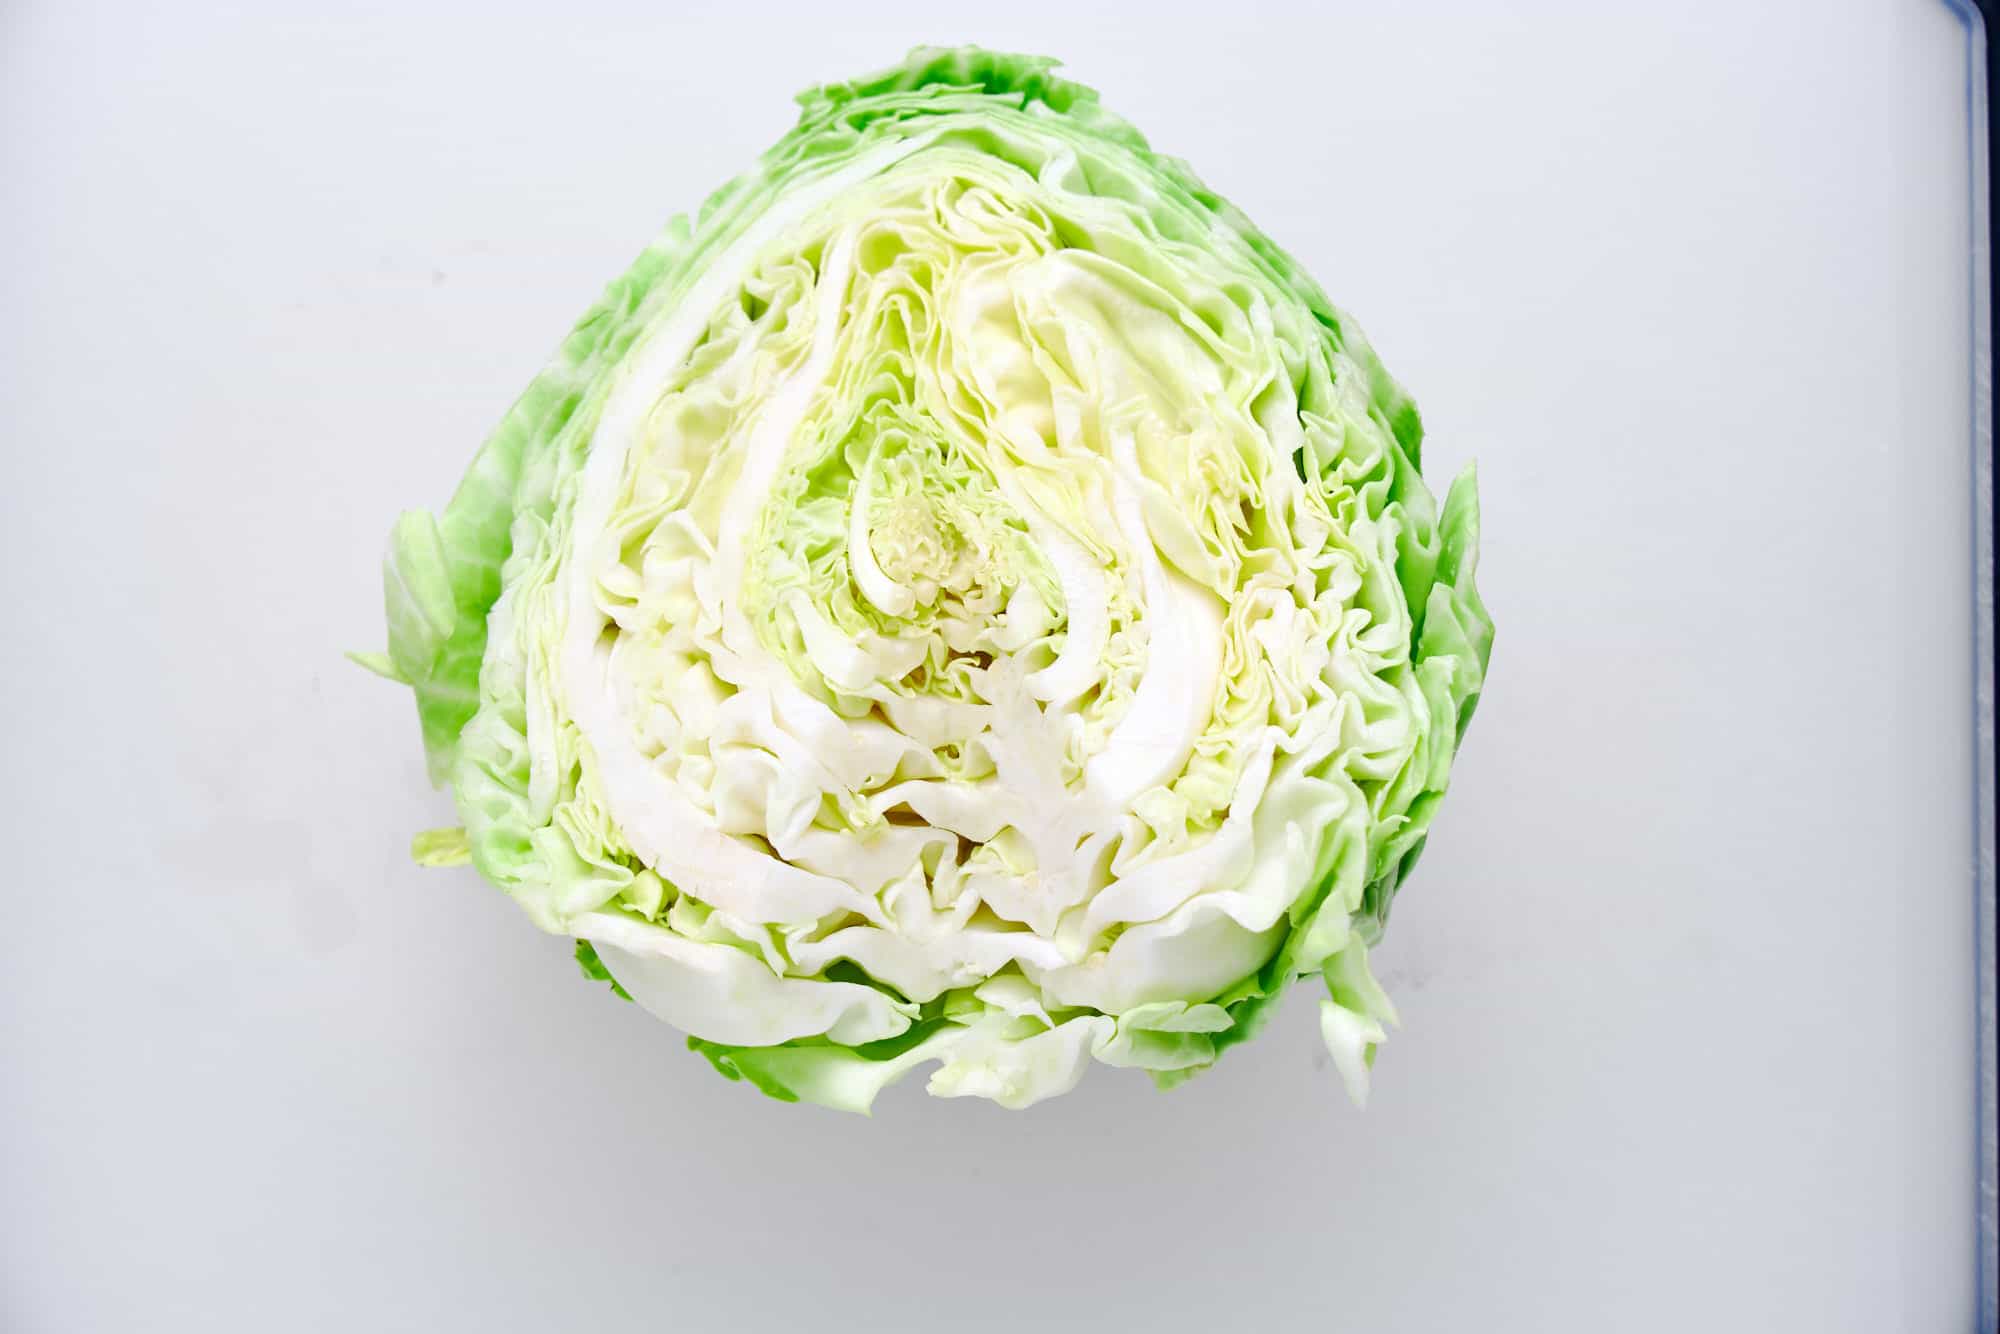 A head of spring cabbage with the core removed.